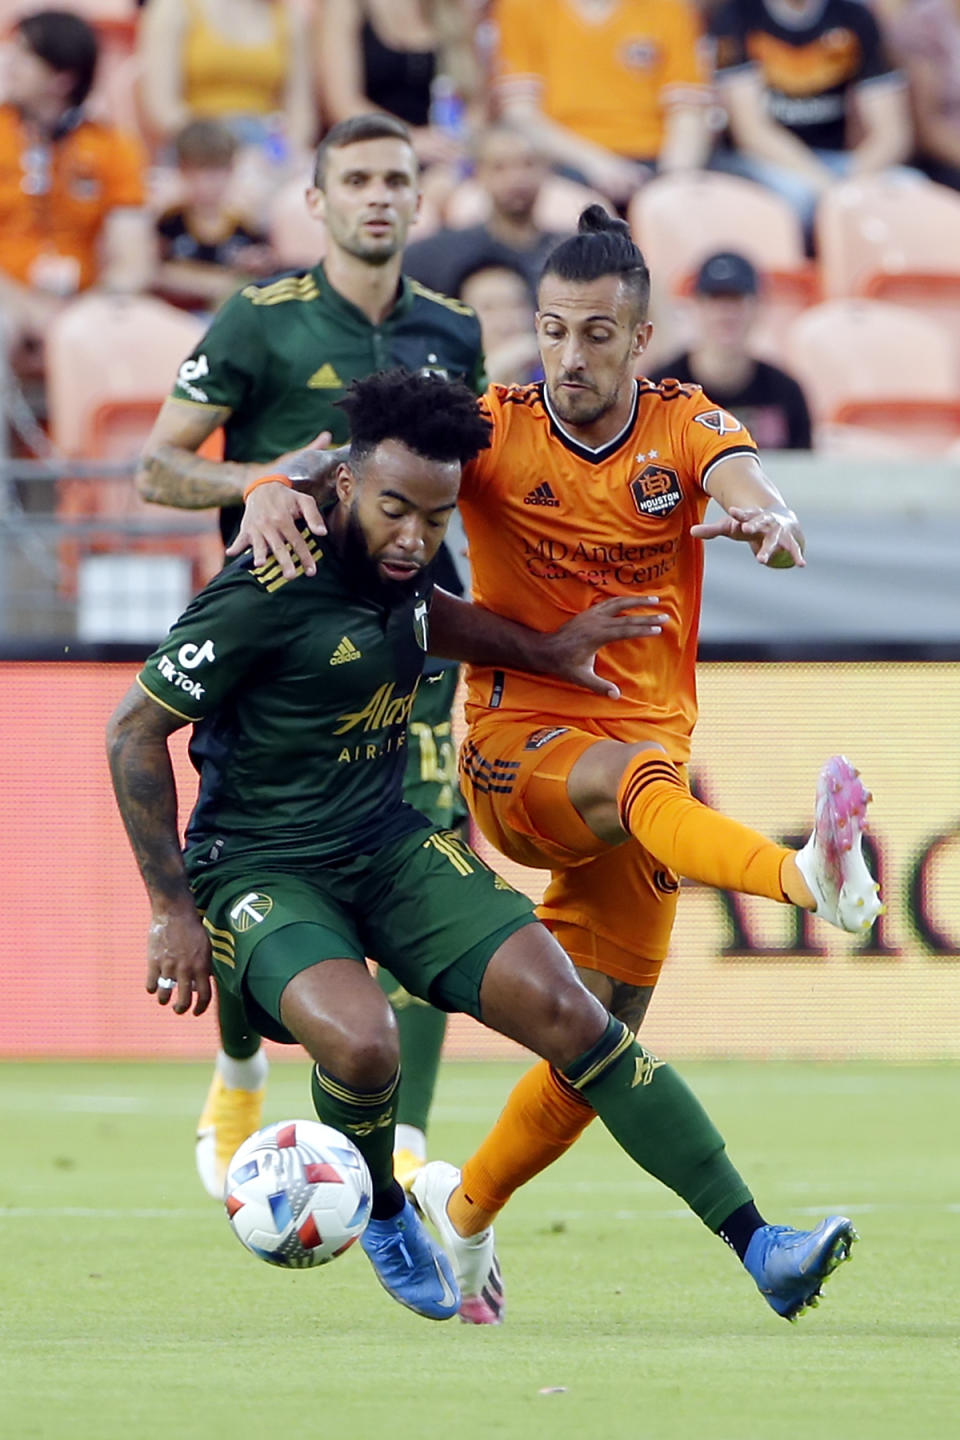 Portland Timbers midfielder Eryk Williamson, left, is pulled back by Houston Dynamo forward Maximiliano Urruti, right, as they chase the ball during the first half of an MLS soccer match Wednesday, June 23, 2021, in Houston. (AP Photo/Michael Wyke)